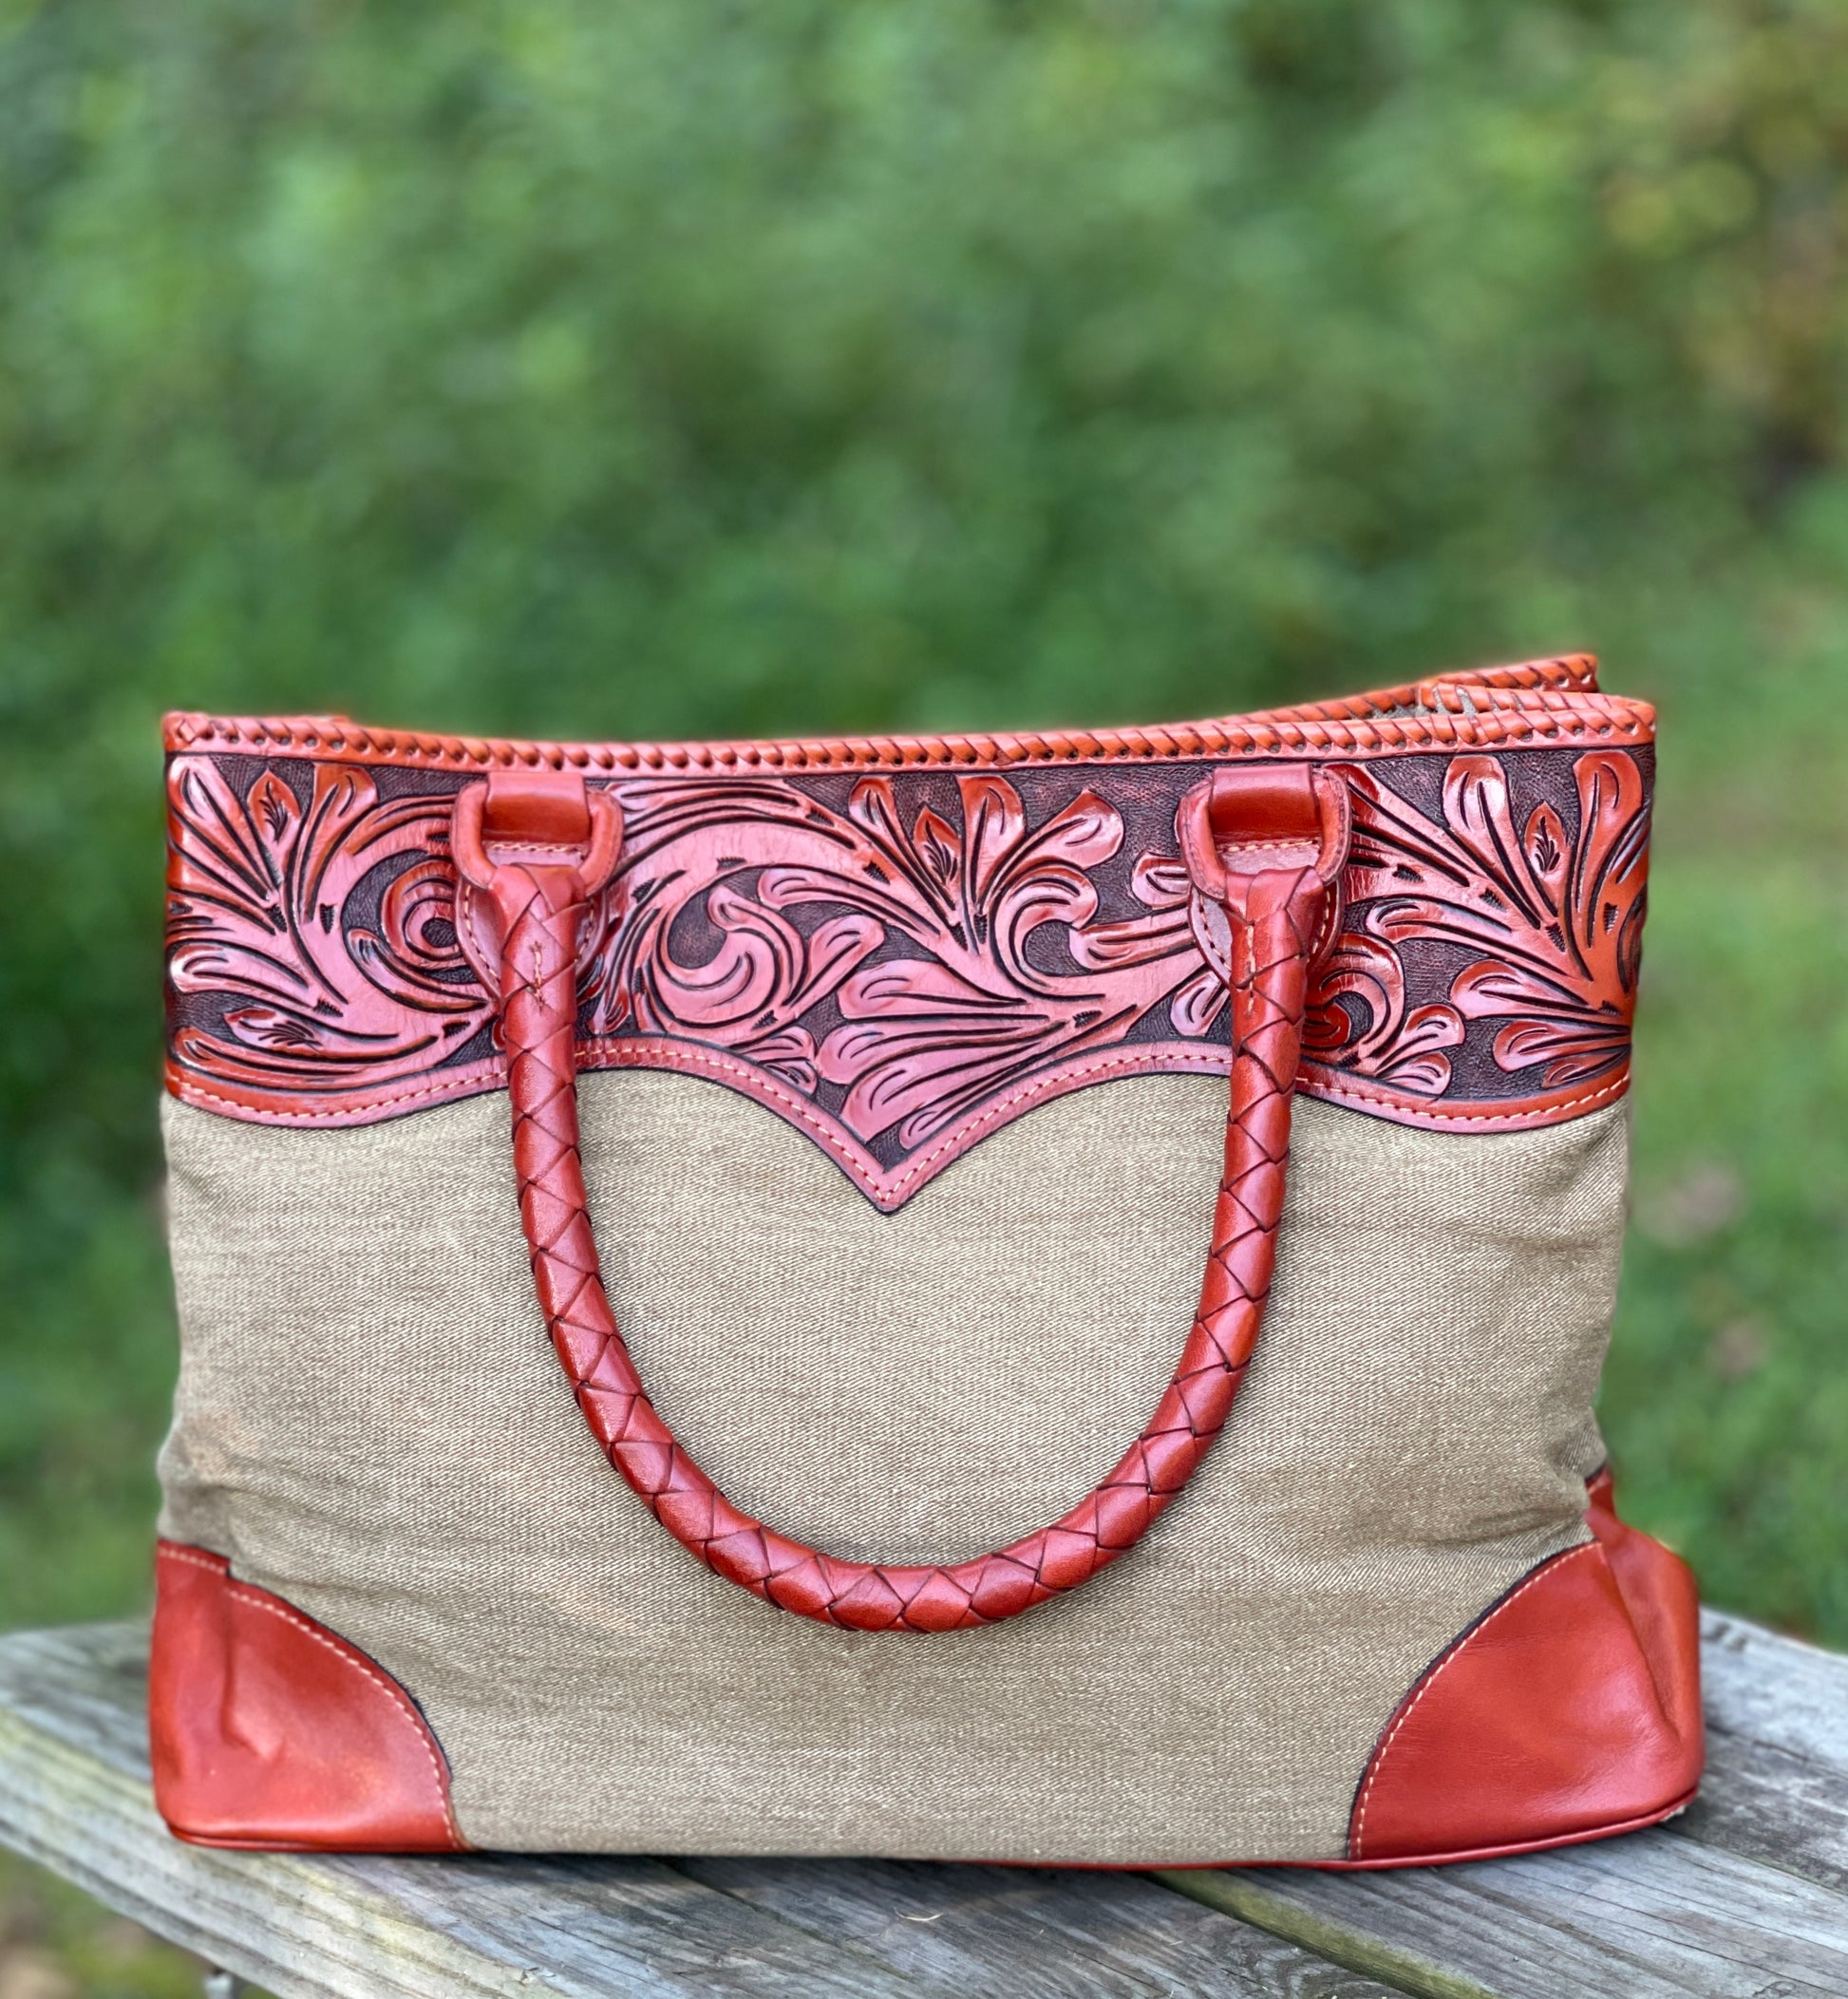 Women's Leather Handbags, Totes, & More